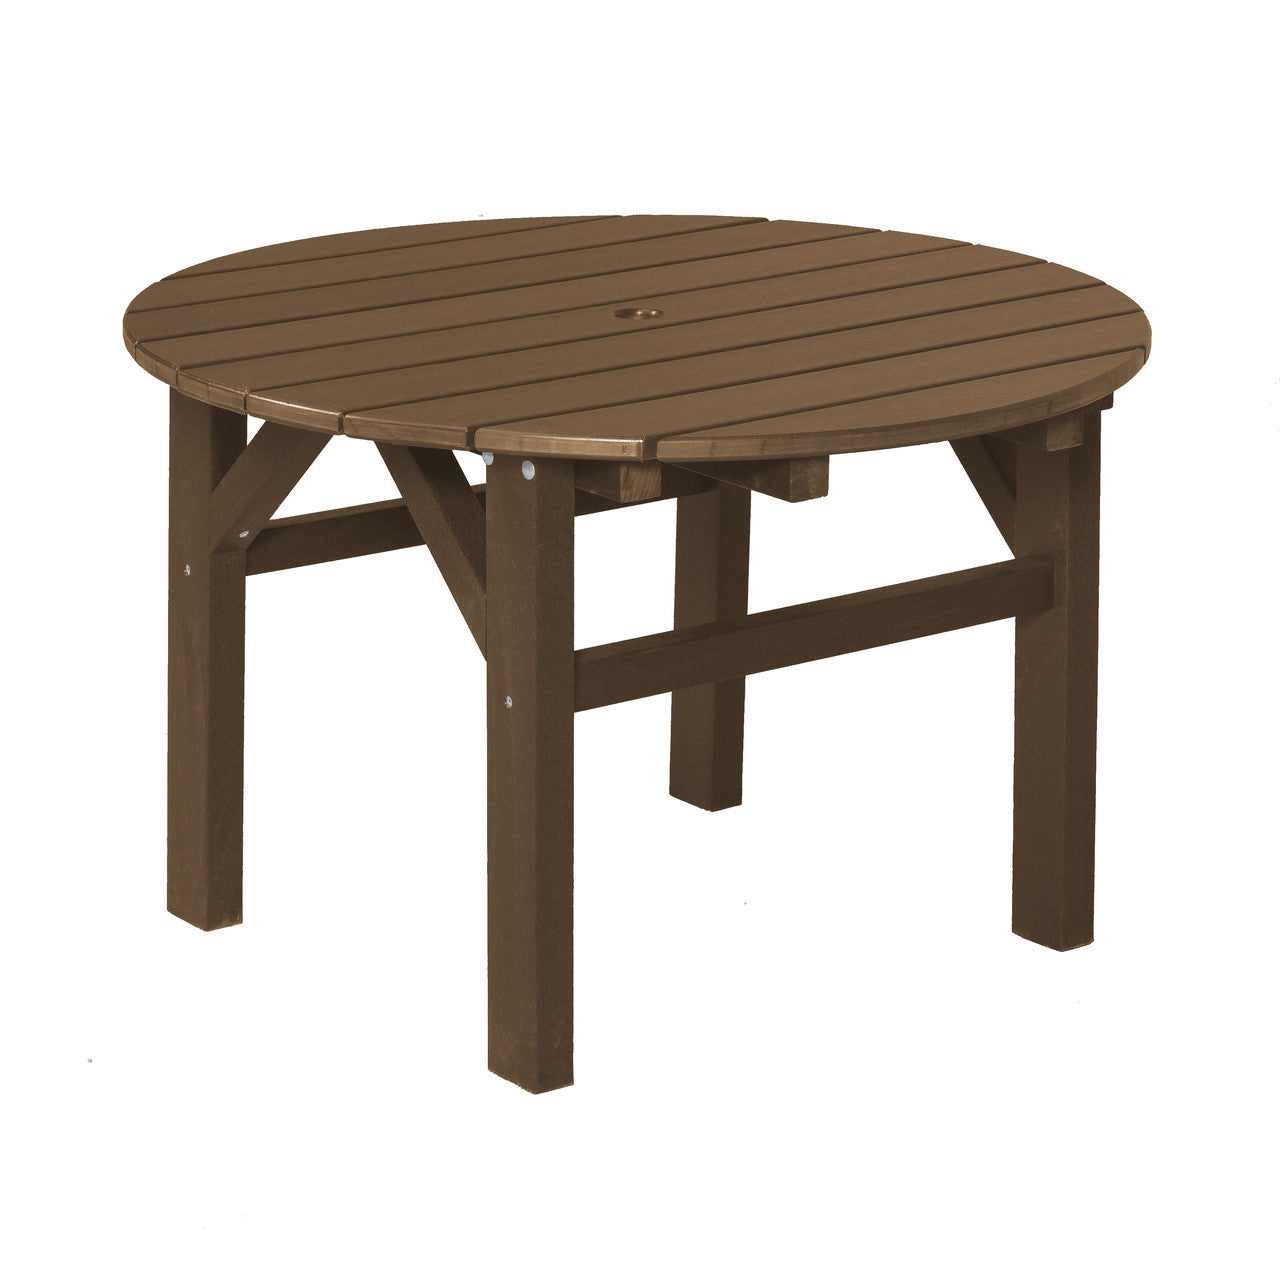 Wildridge Classic Poly-Lumber 33" Occassional Table